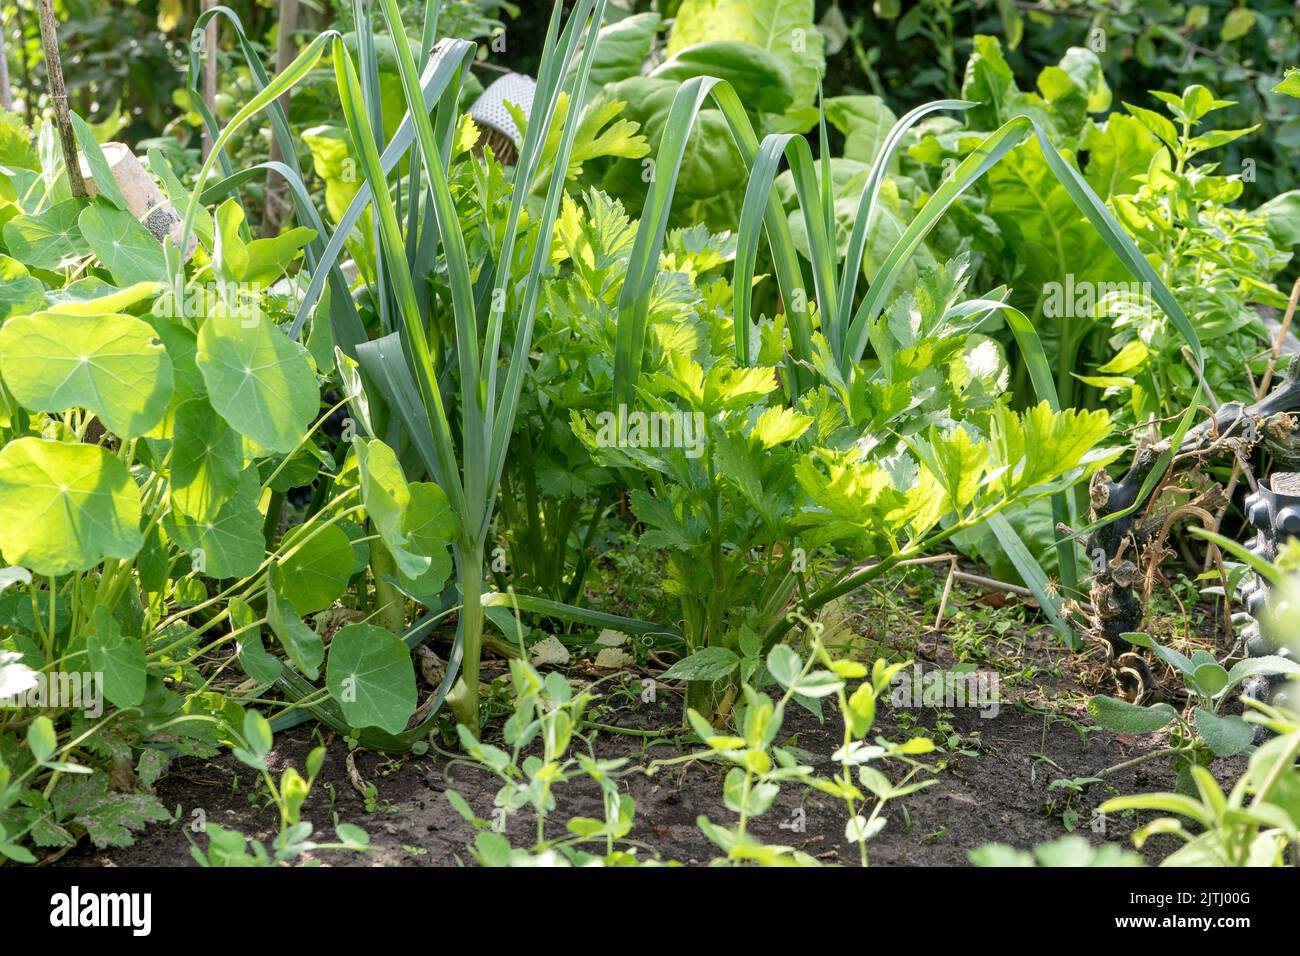 Garden bed with different vegetable plants and herbs Stock Photo